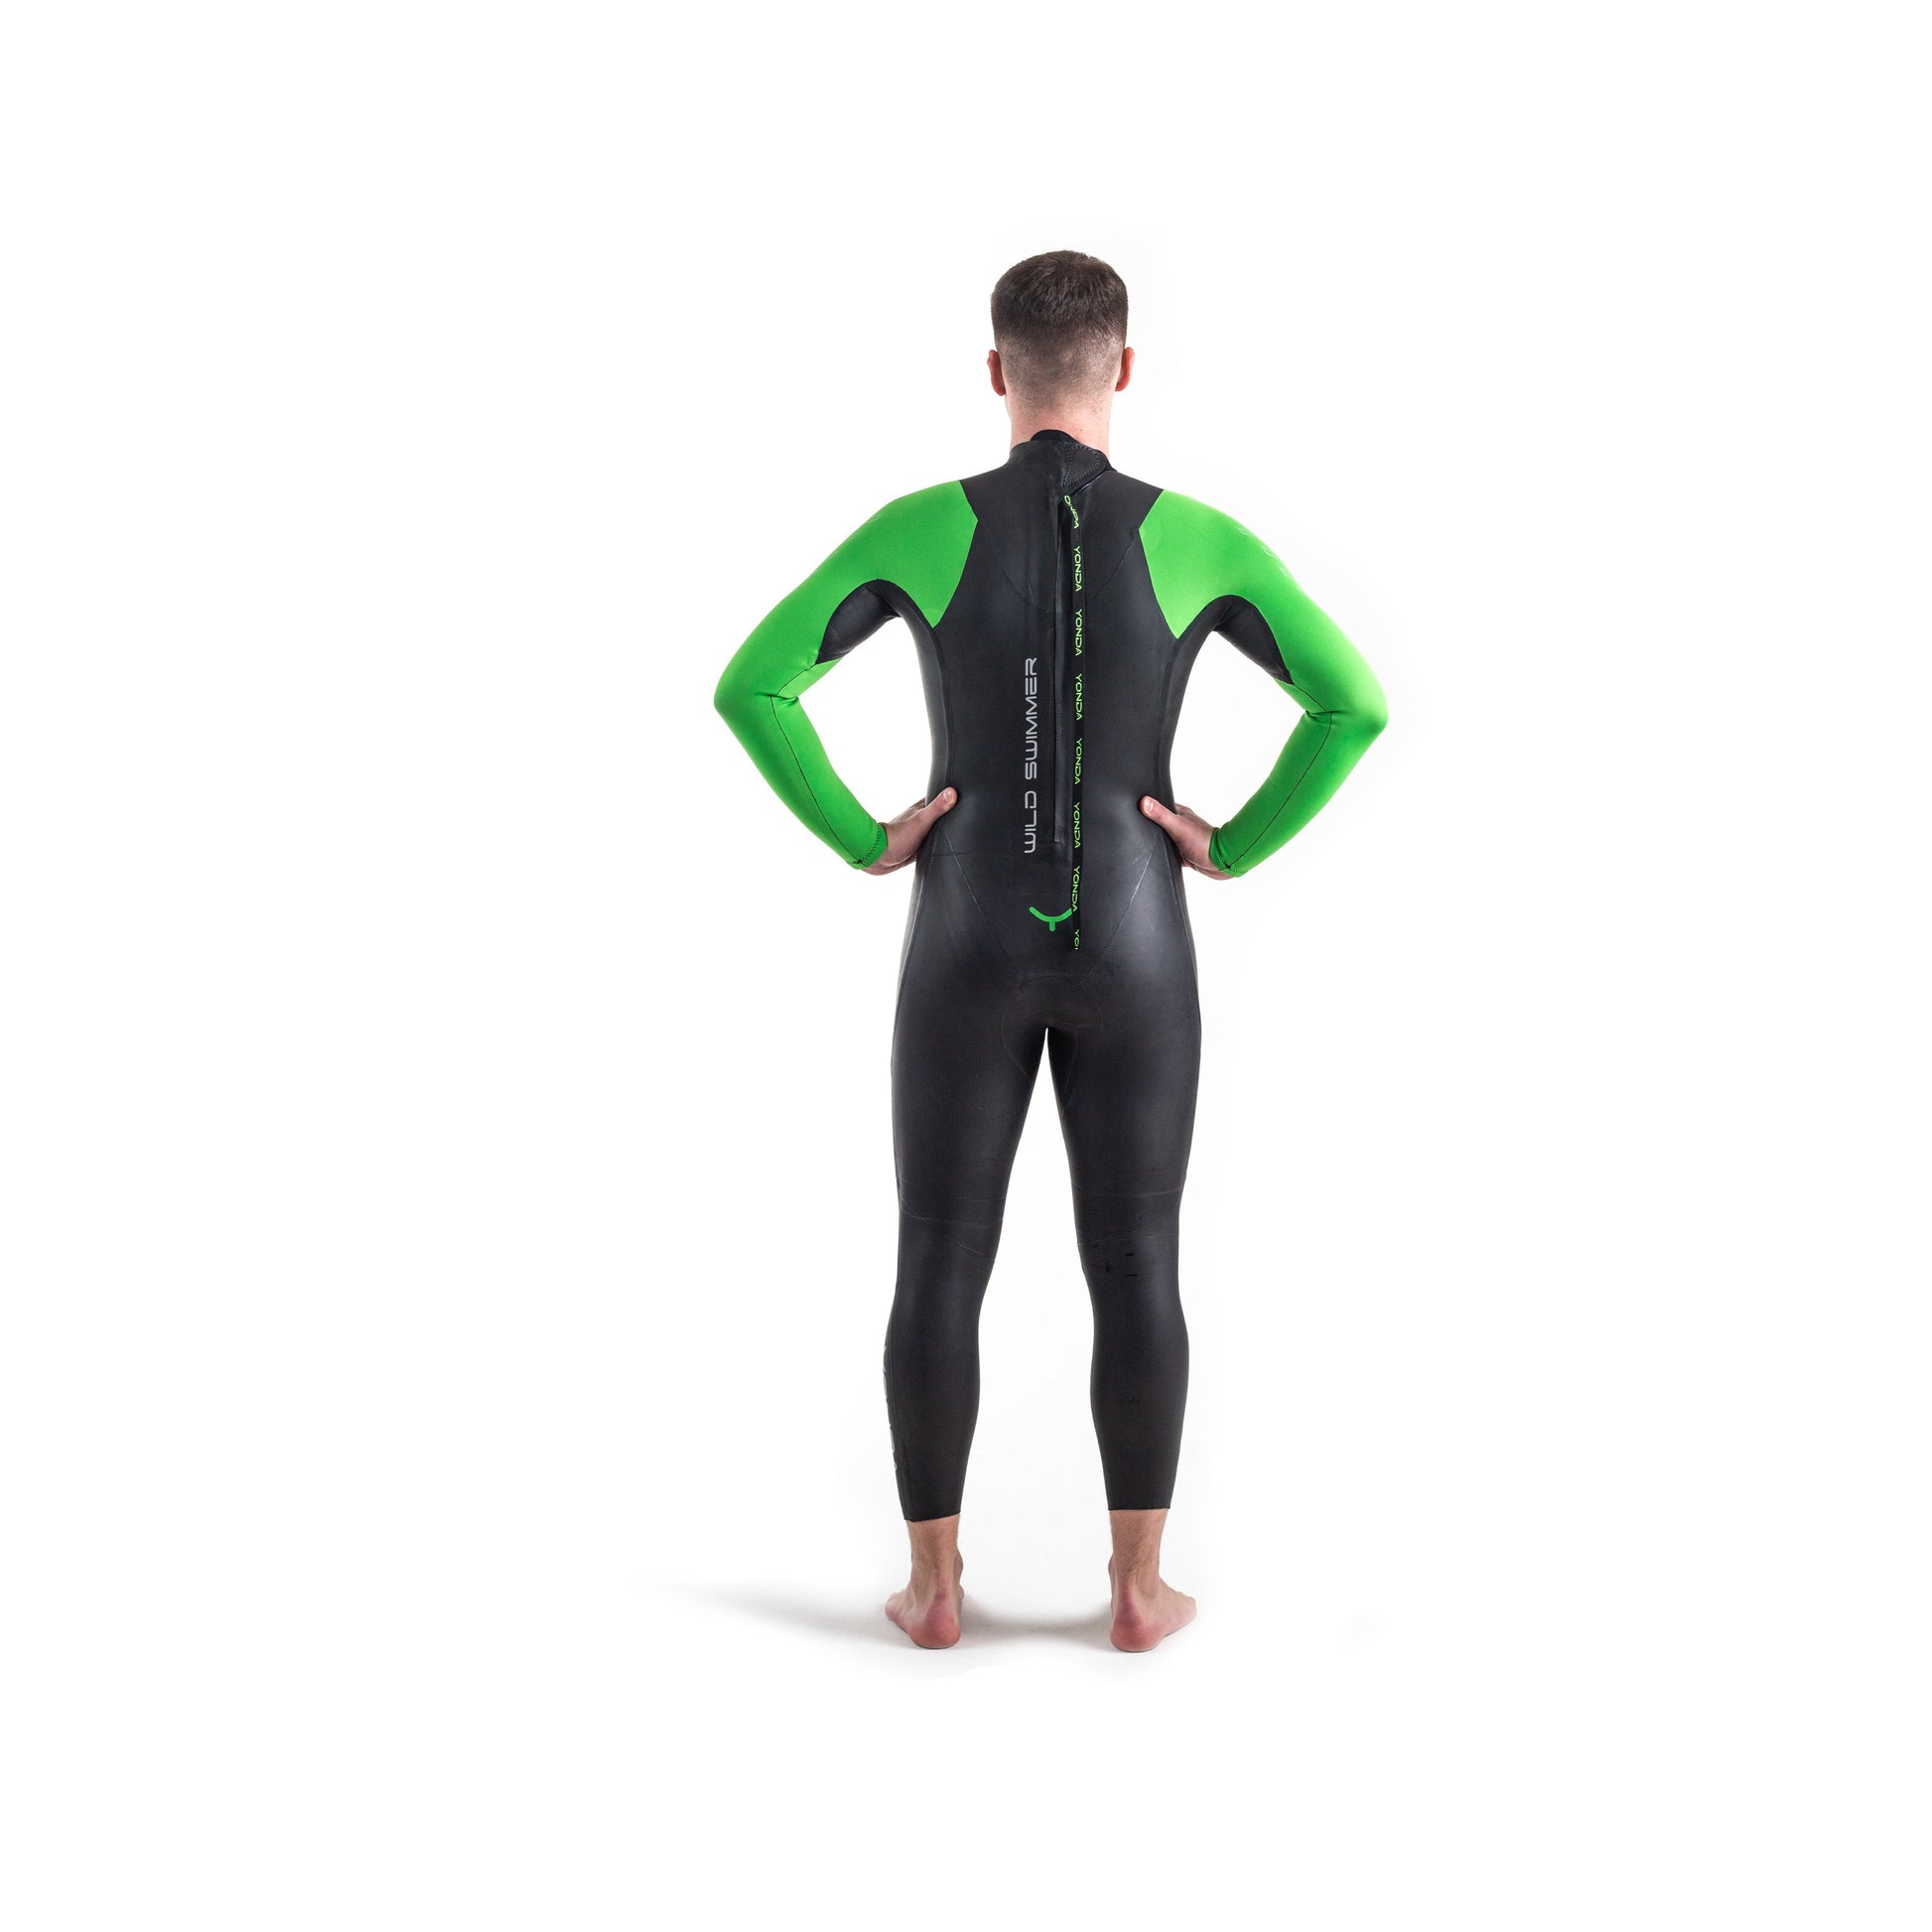 Back View of a man in the Spook Wetsuit by Yonda. Green sleeves.